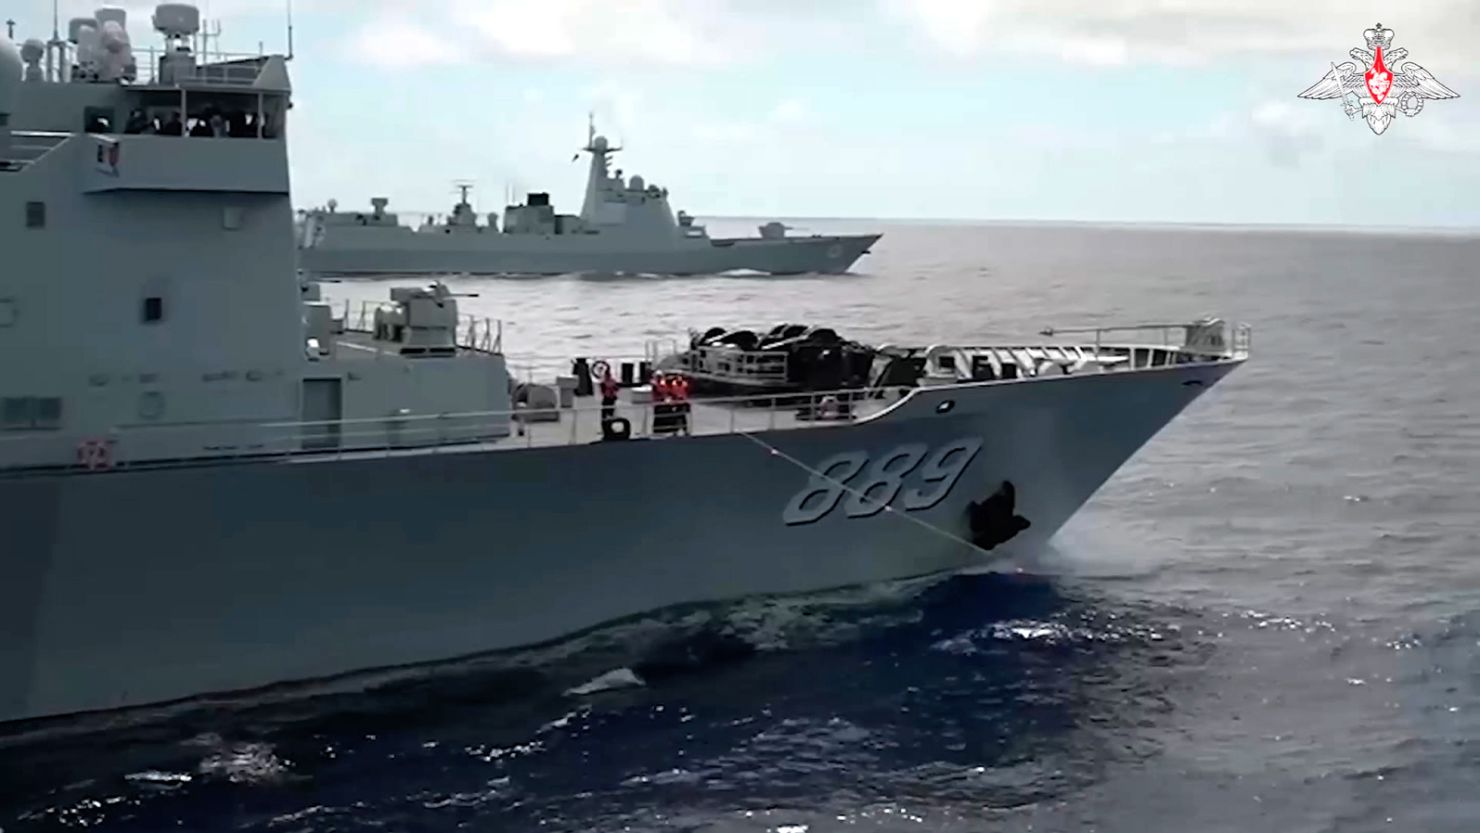 Chinese and Russian vessels conduct joint exercises in the East China Sea.